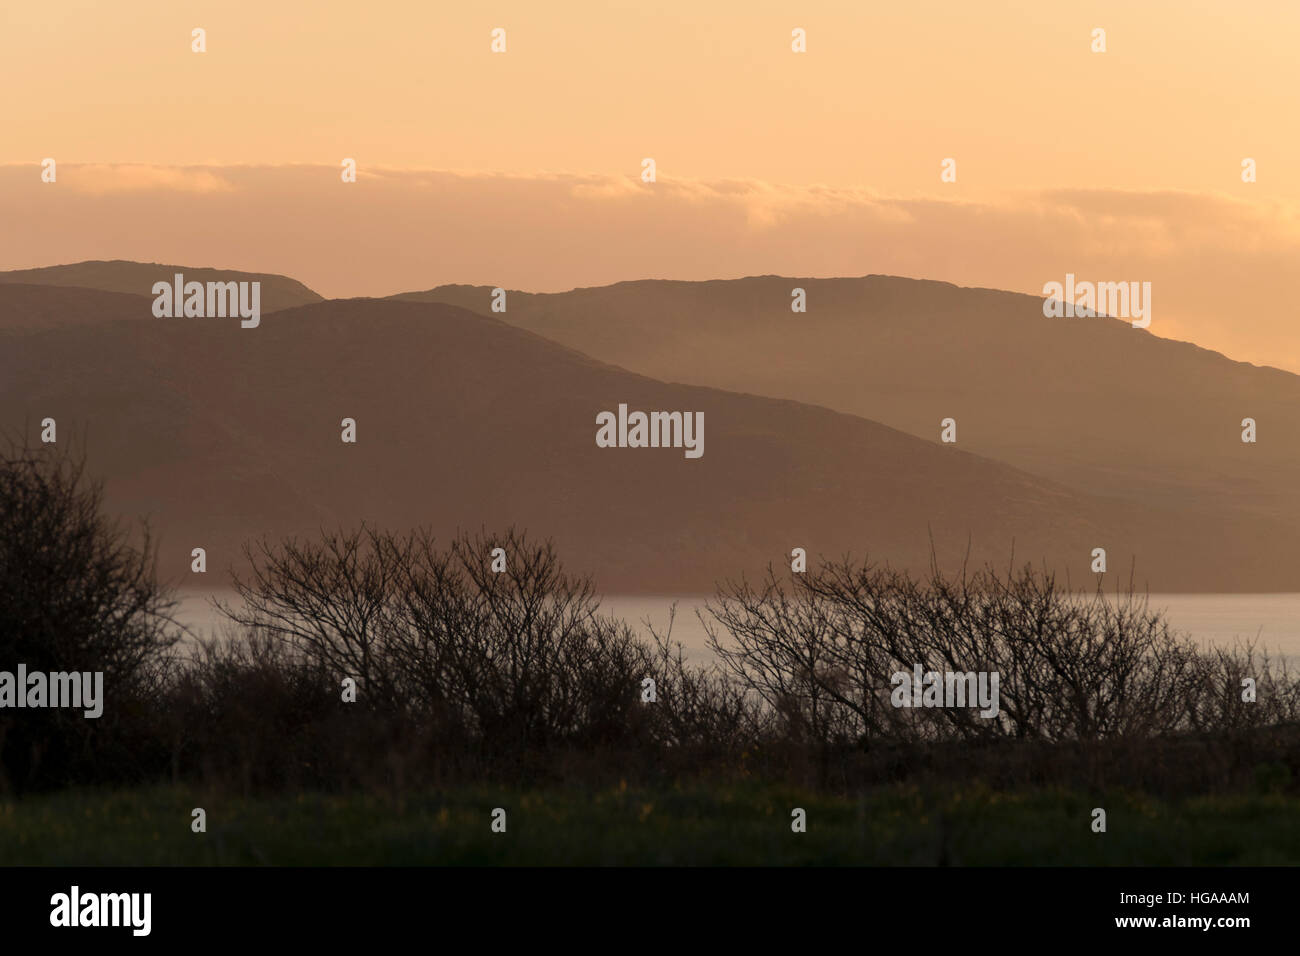 The sun sets on the hills of the Mizen Peninsula, County Cork, Ireland creating a golden glow Stock Photo